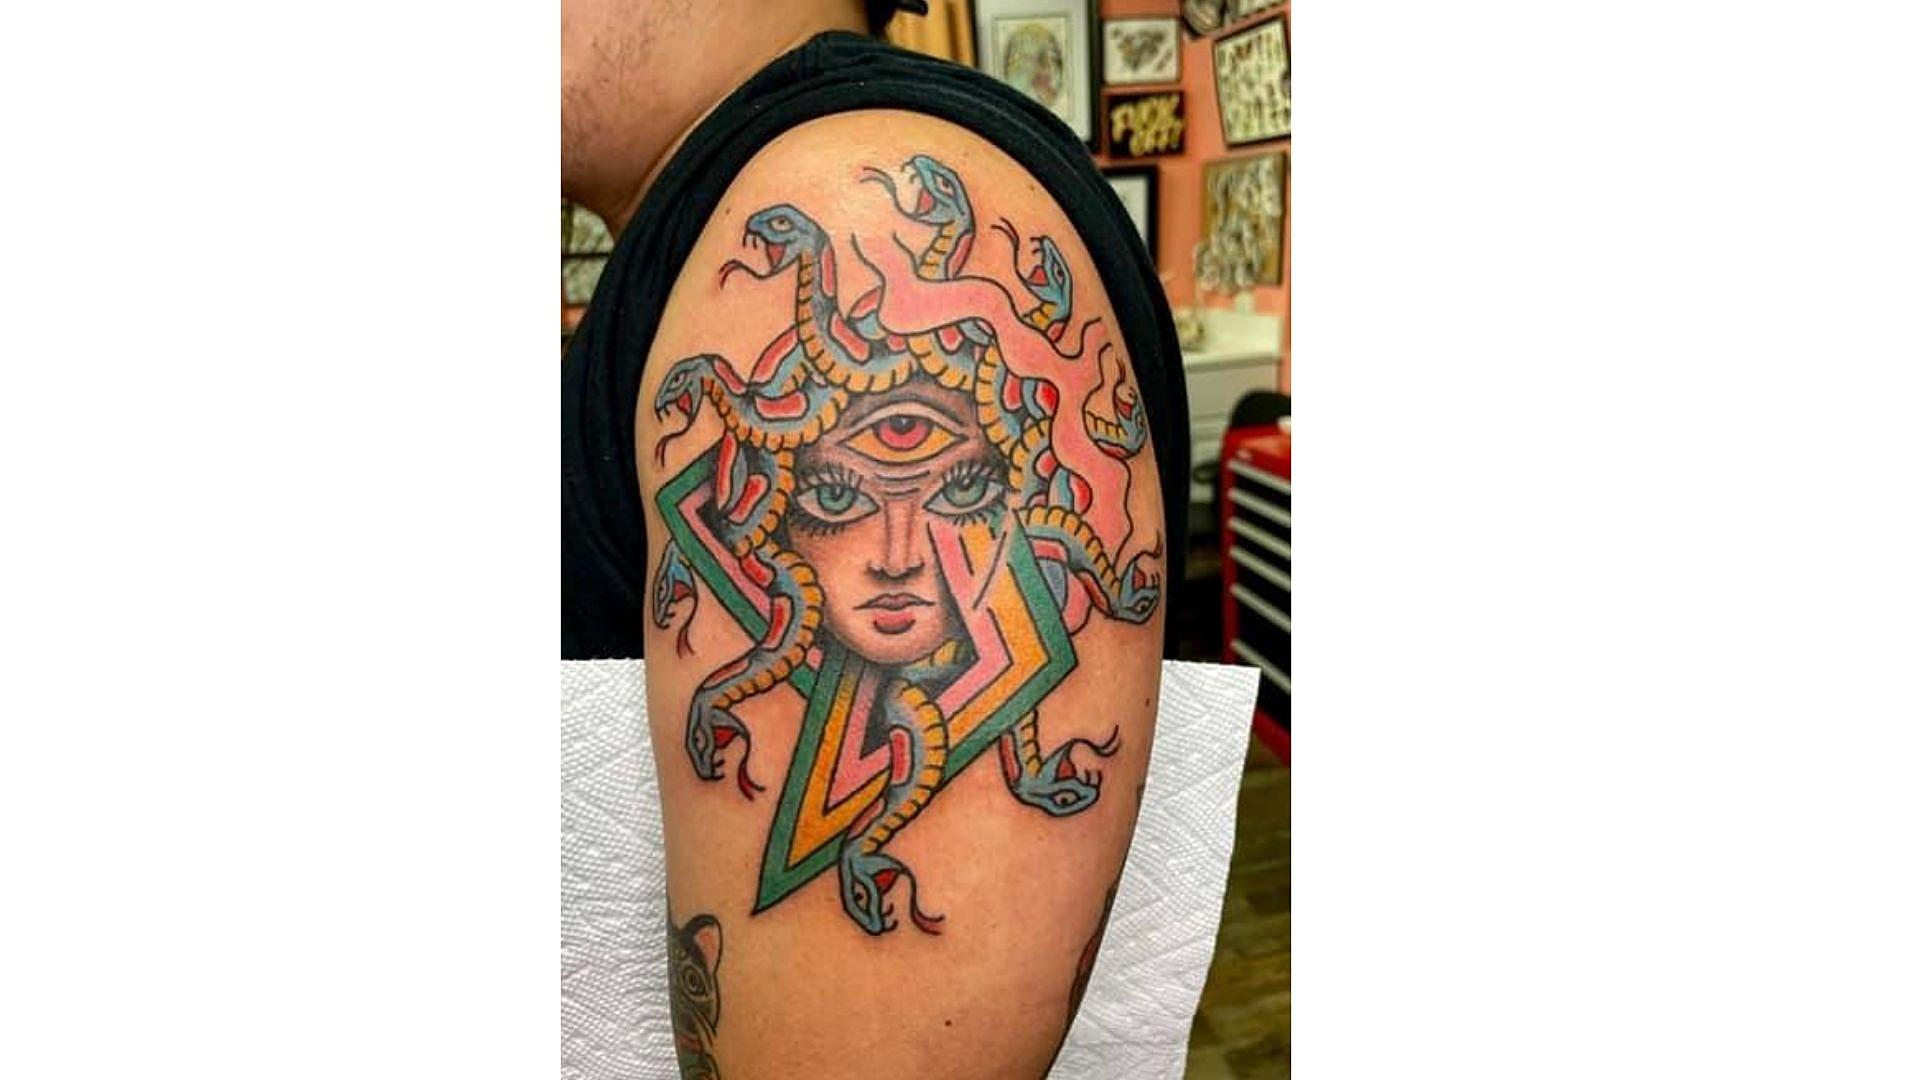 Think ink! 17 of the best tattoo shops in NJ